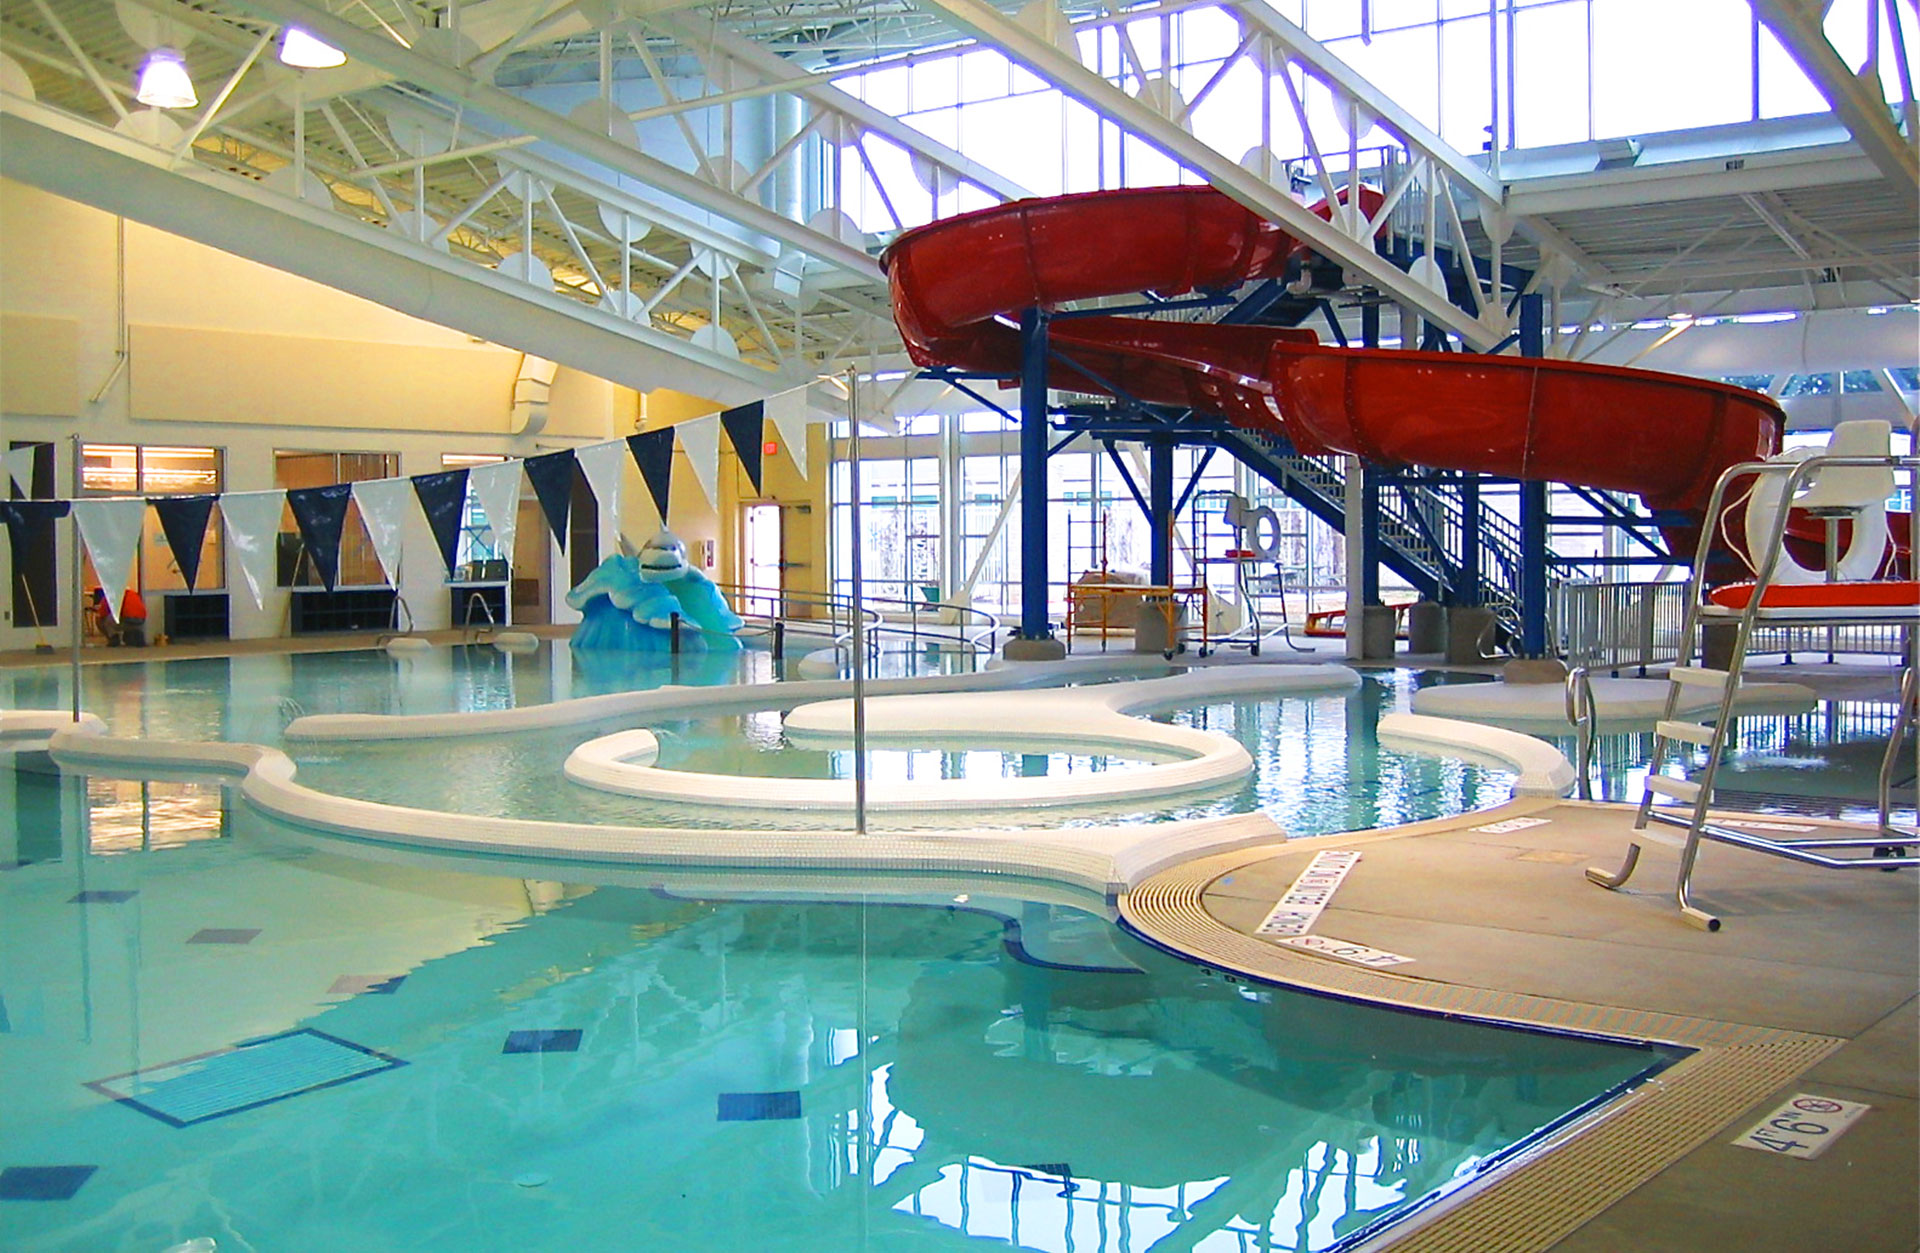 East Portland Community Center swimming pool and water slides